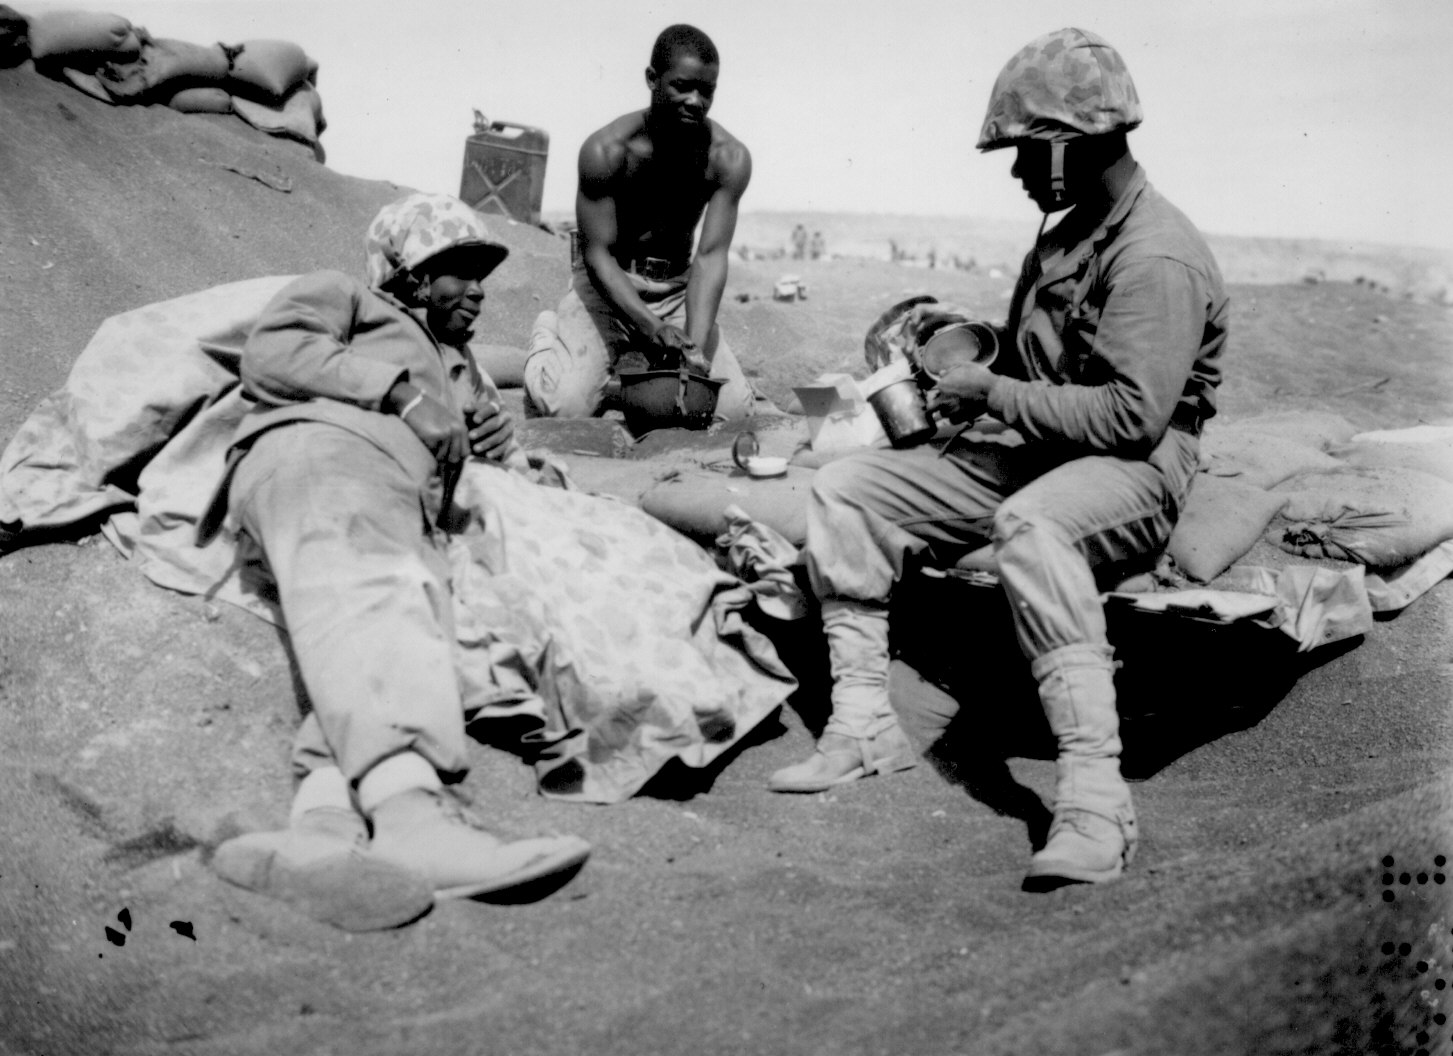 African-American US Marines Willie J. Kanody, Elif Hill, and John Alexander on a beach at Iwo Jima, Mar 1945